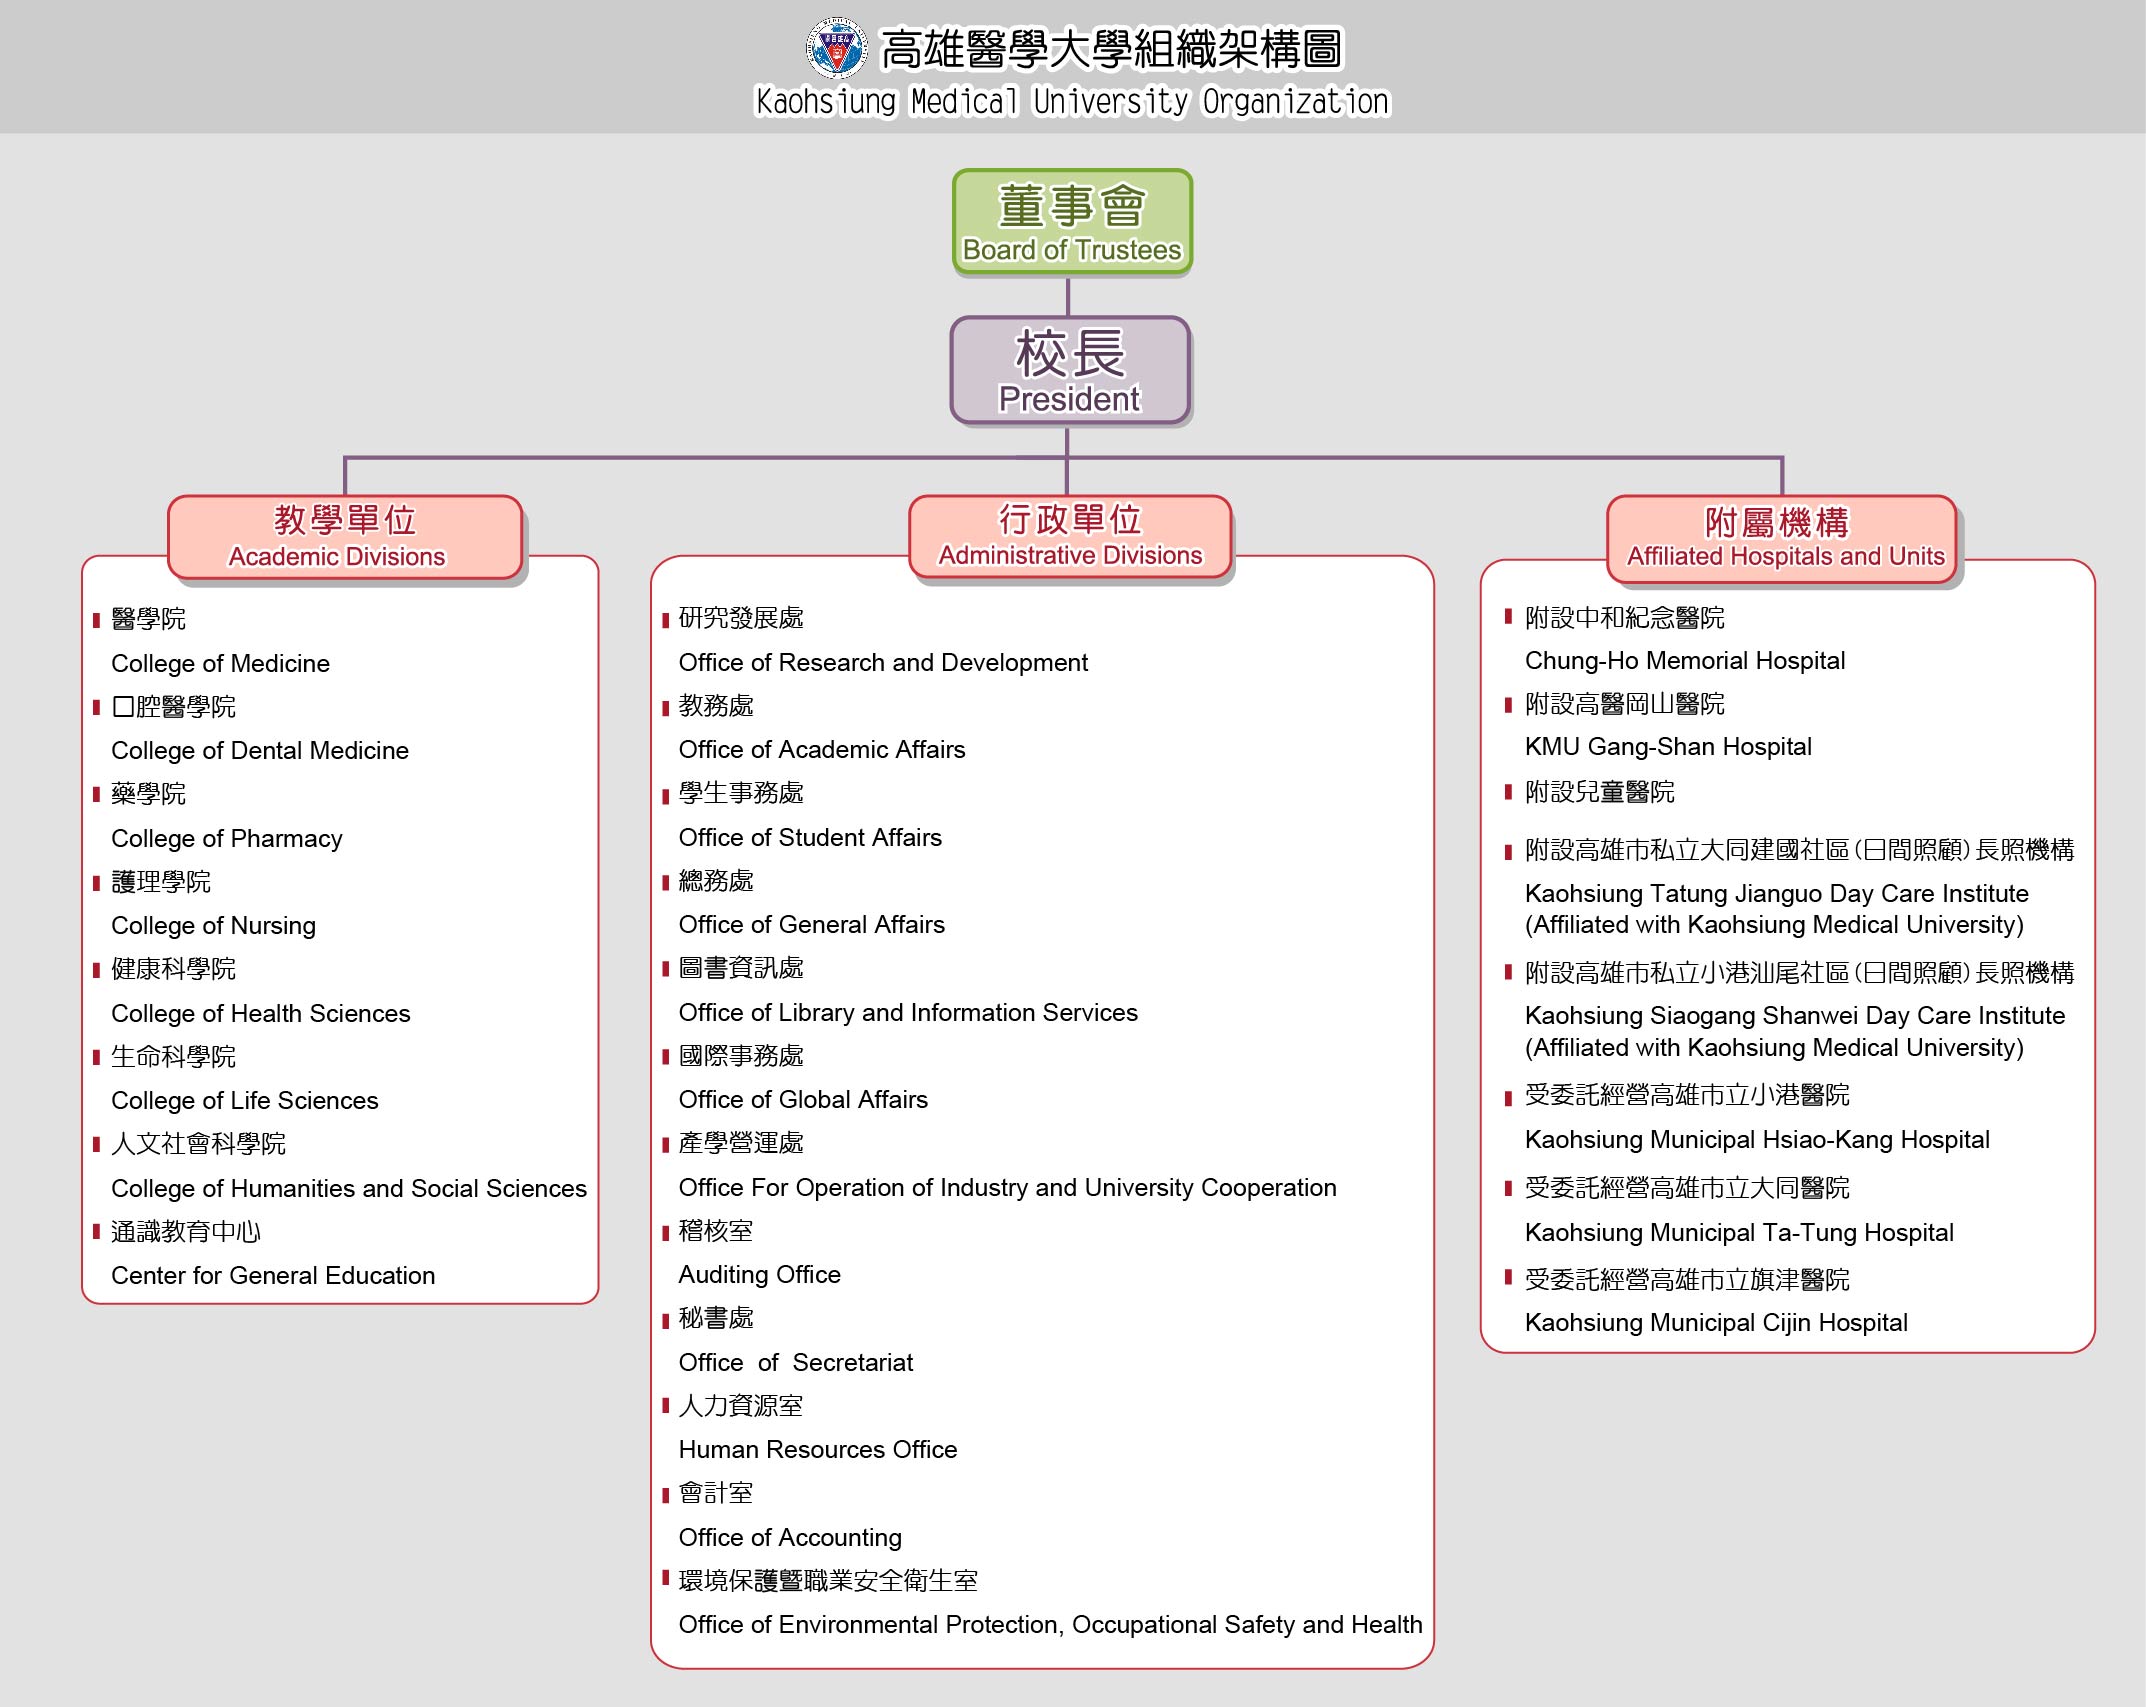 This is a Kaohsiung Medical University Organization chart, for more information, please refer to the text description in the paragraph below.